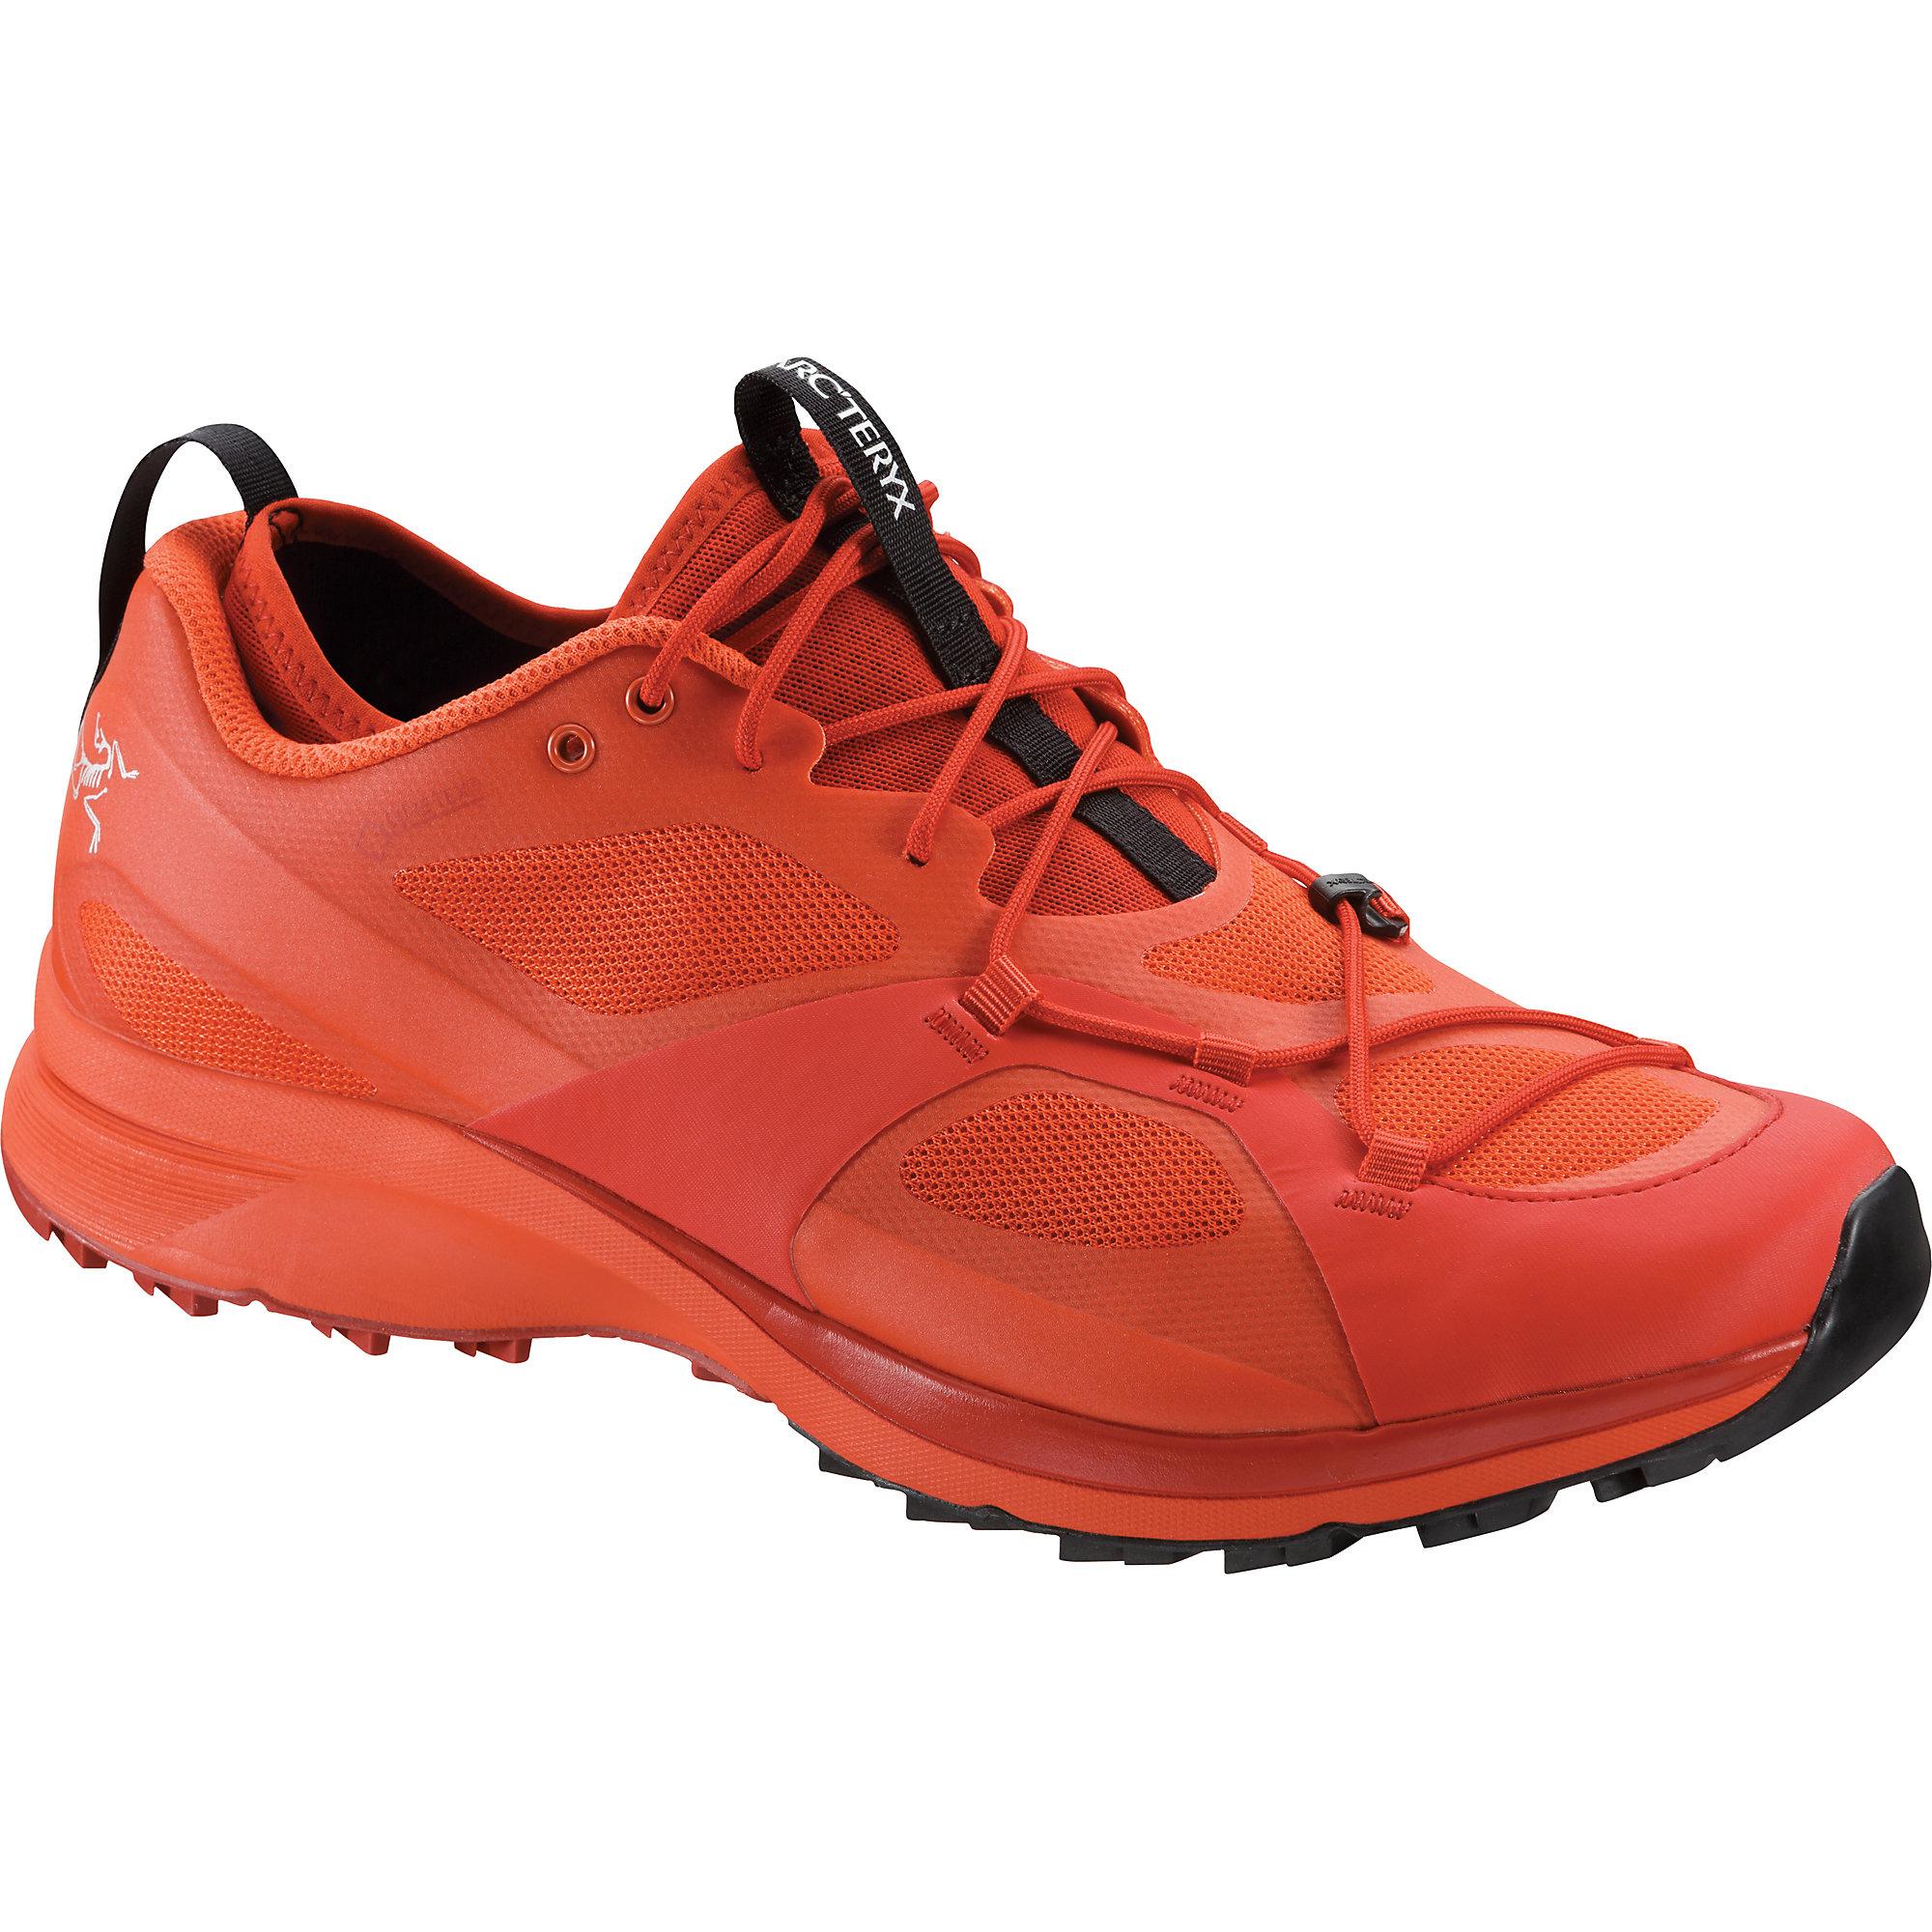 Arc'teryx Norvan Vt Gtx Shoe in Red for 